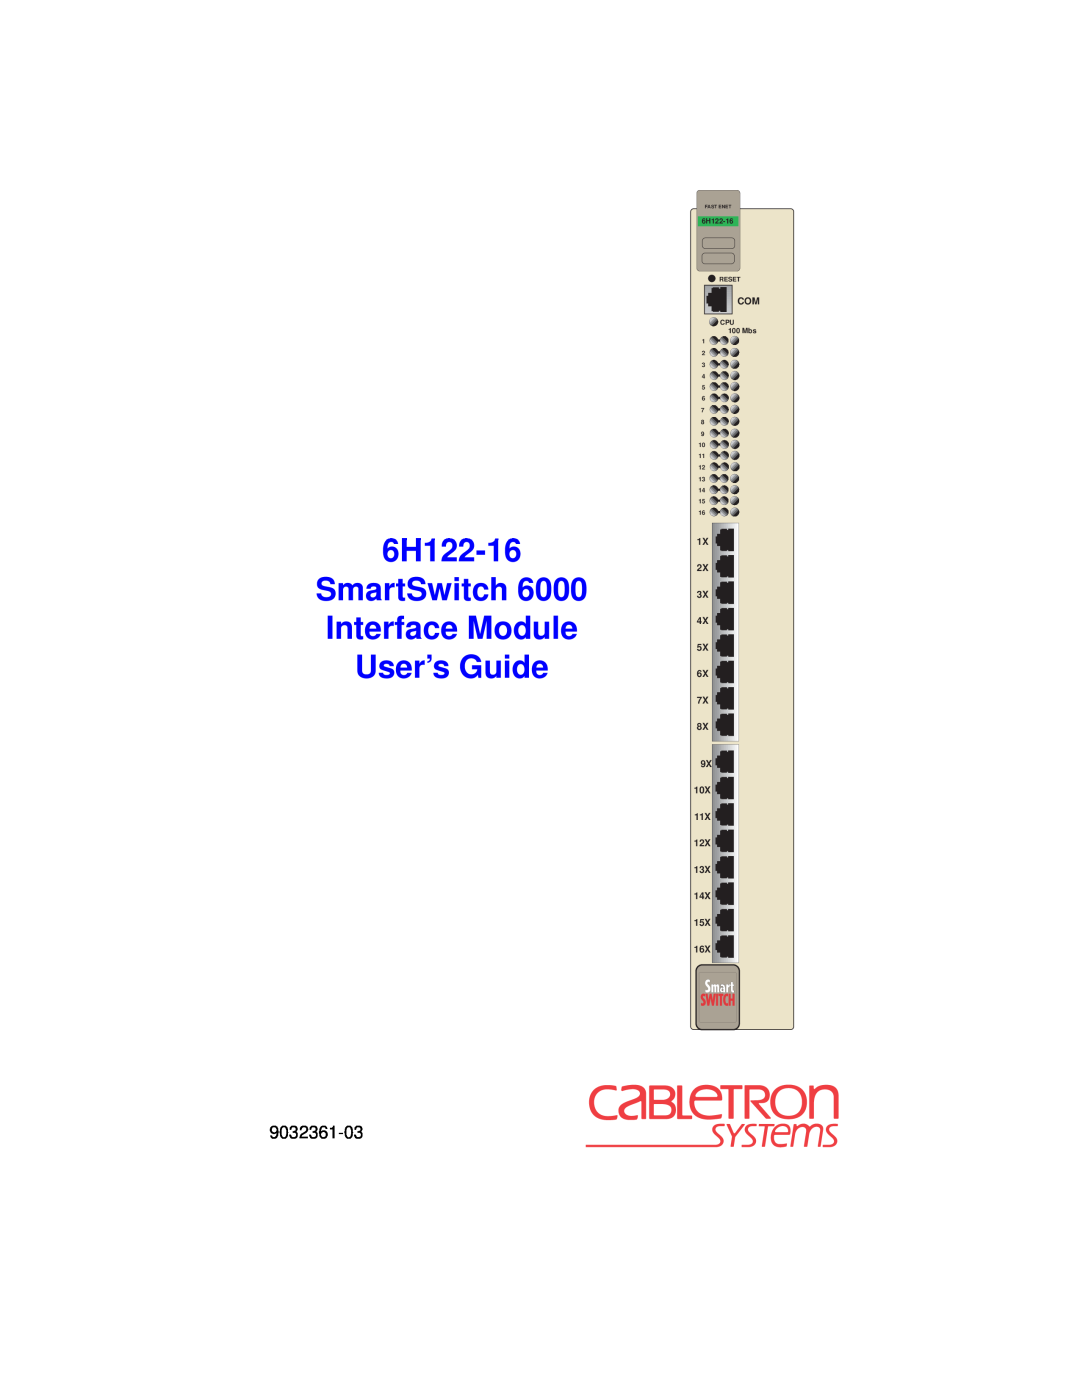 Cabletron Systems manual 6H122-16 SmartSwitch 6000 Interface Module User’s Guide, 9032361-03, 6H122-16 RESET, Fast Enet 